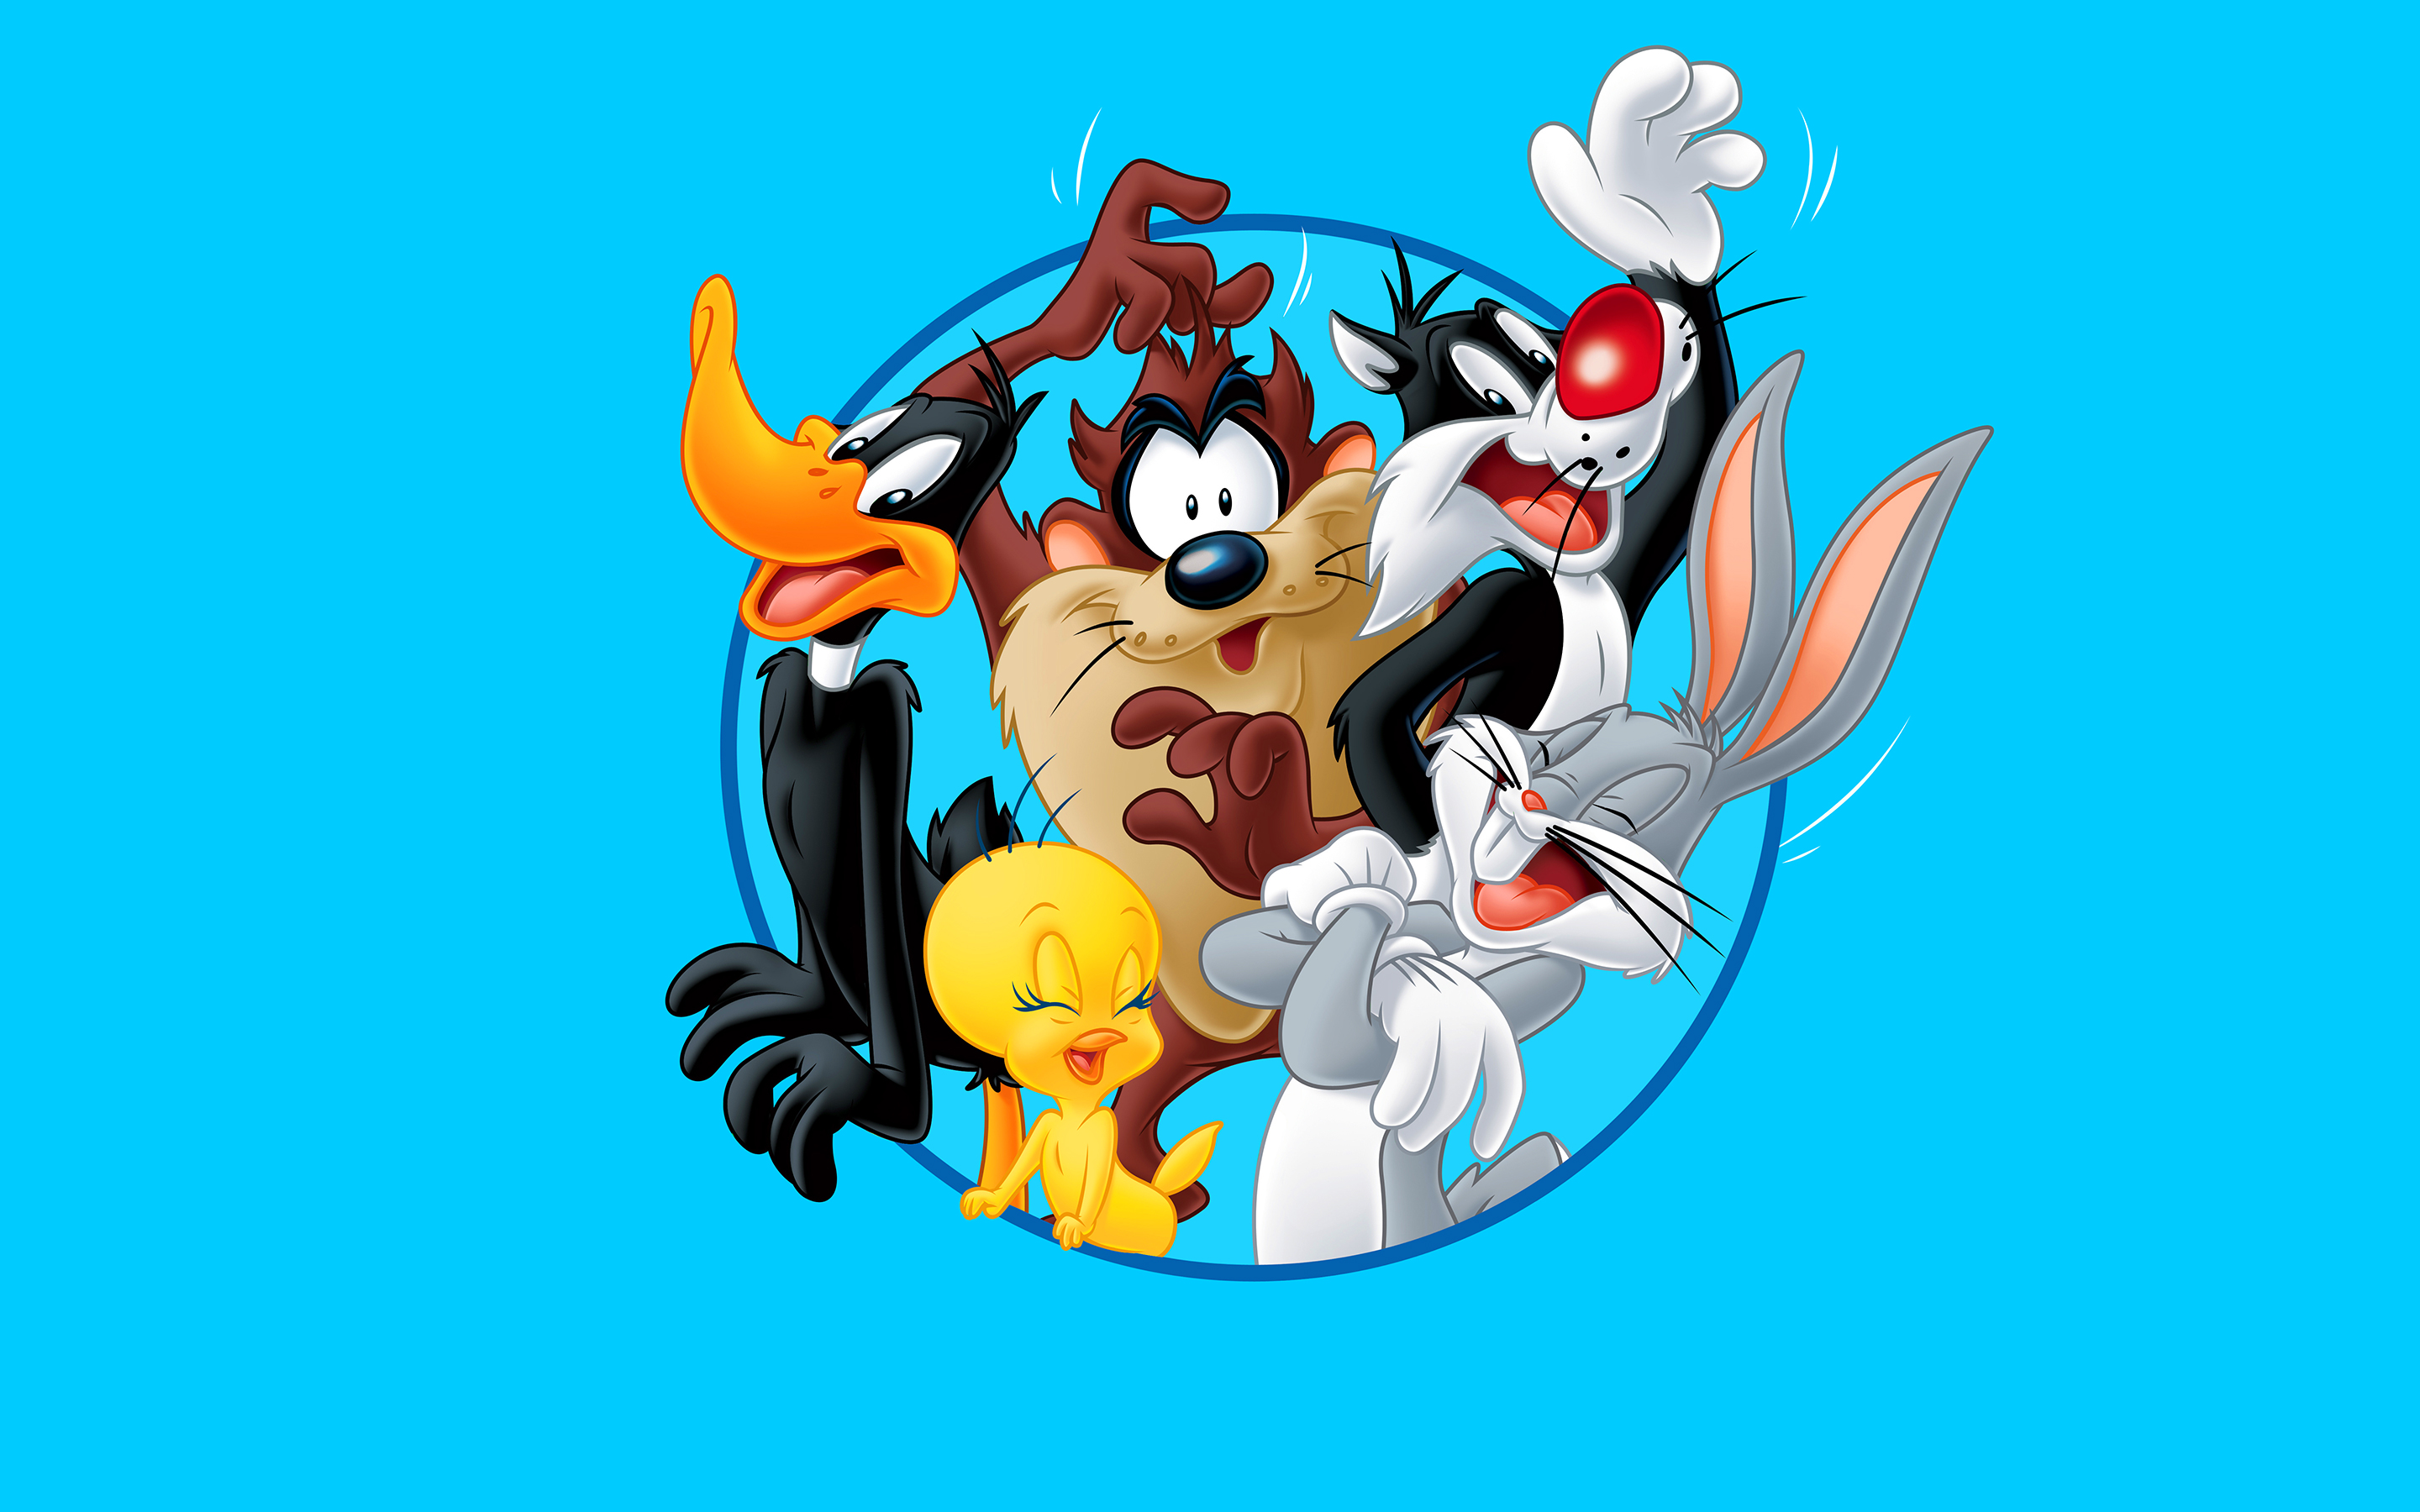 The looney tunes gang